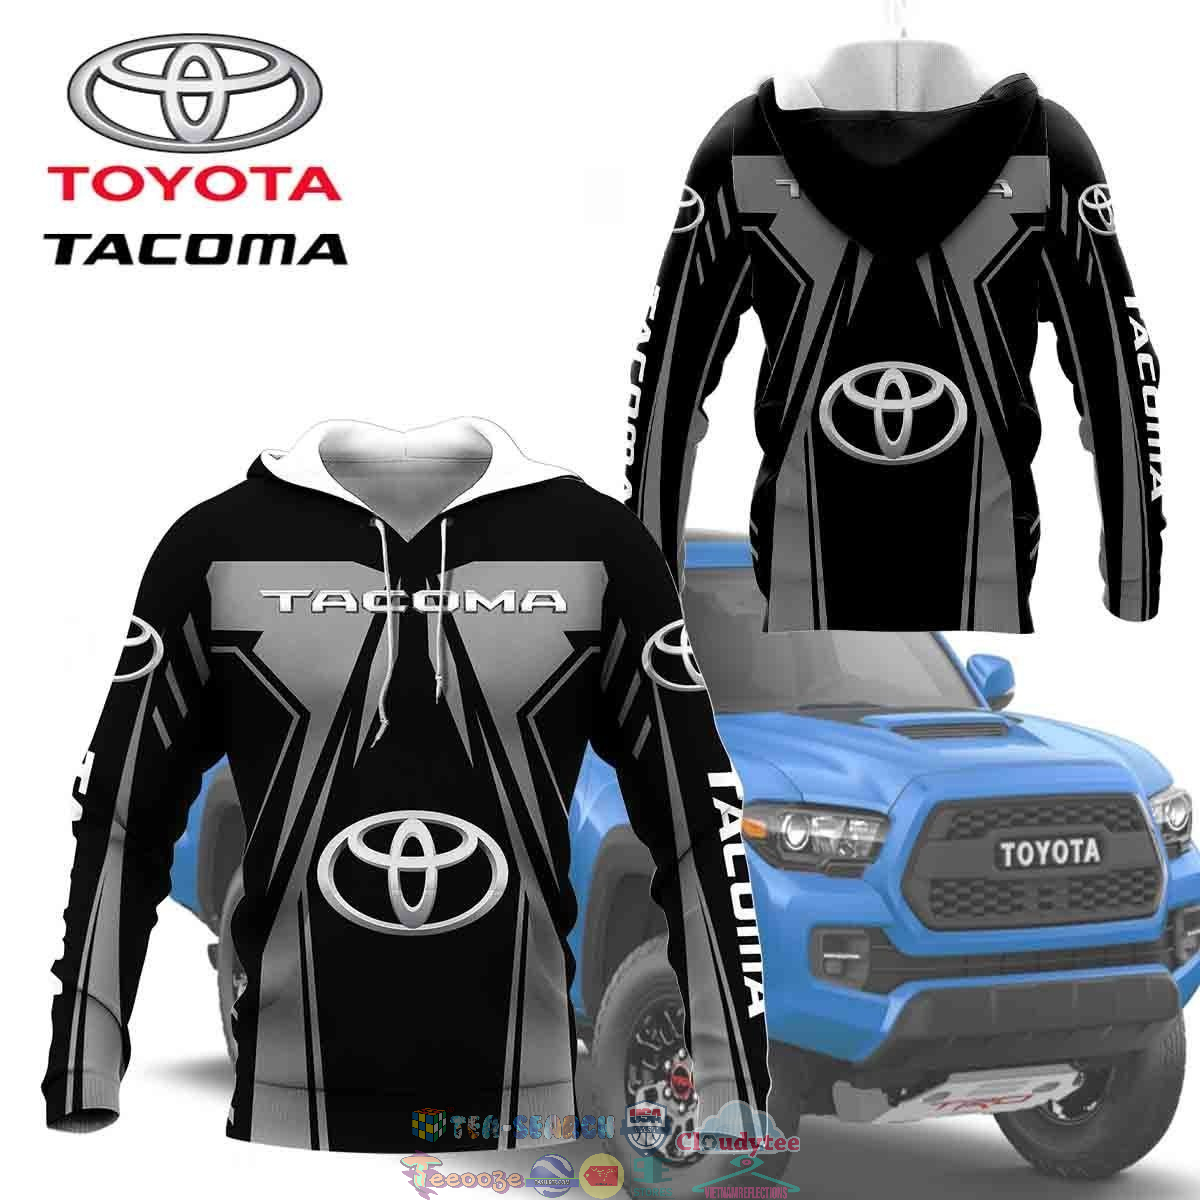 Toyota Tacoma ver 18 3D hoodie and t-shirt – Saleoff